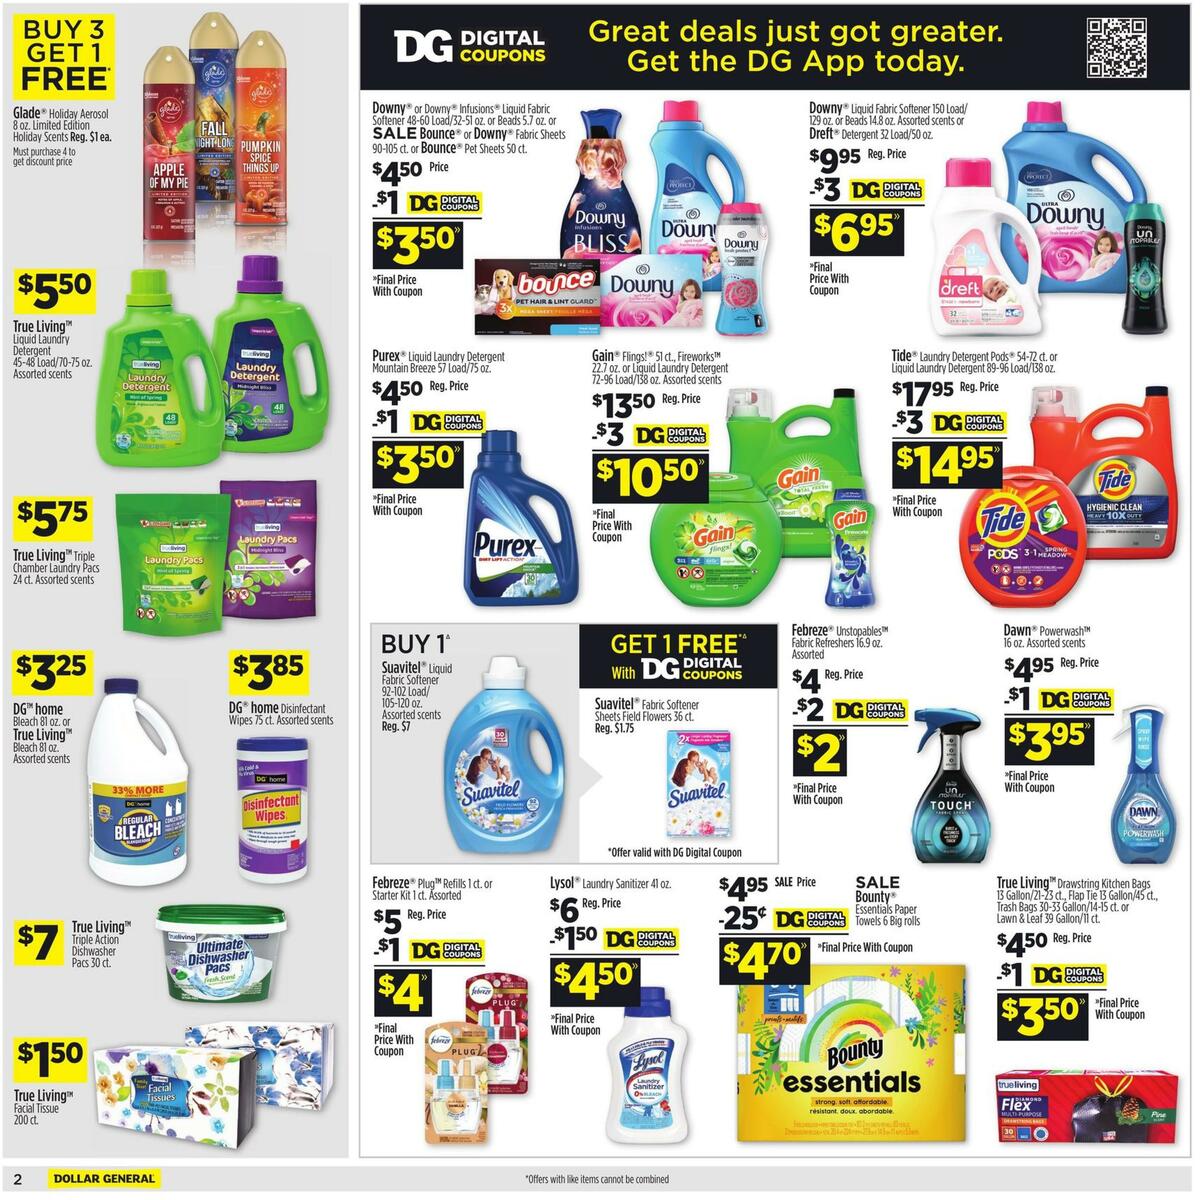 Dollar General Weekly Ad from October 10